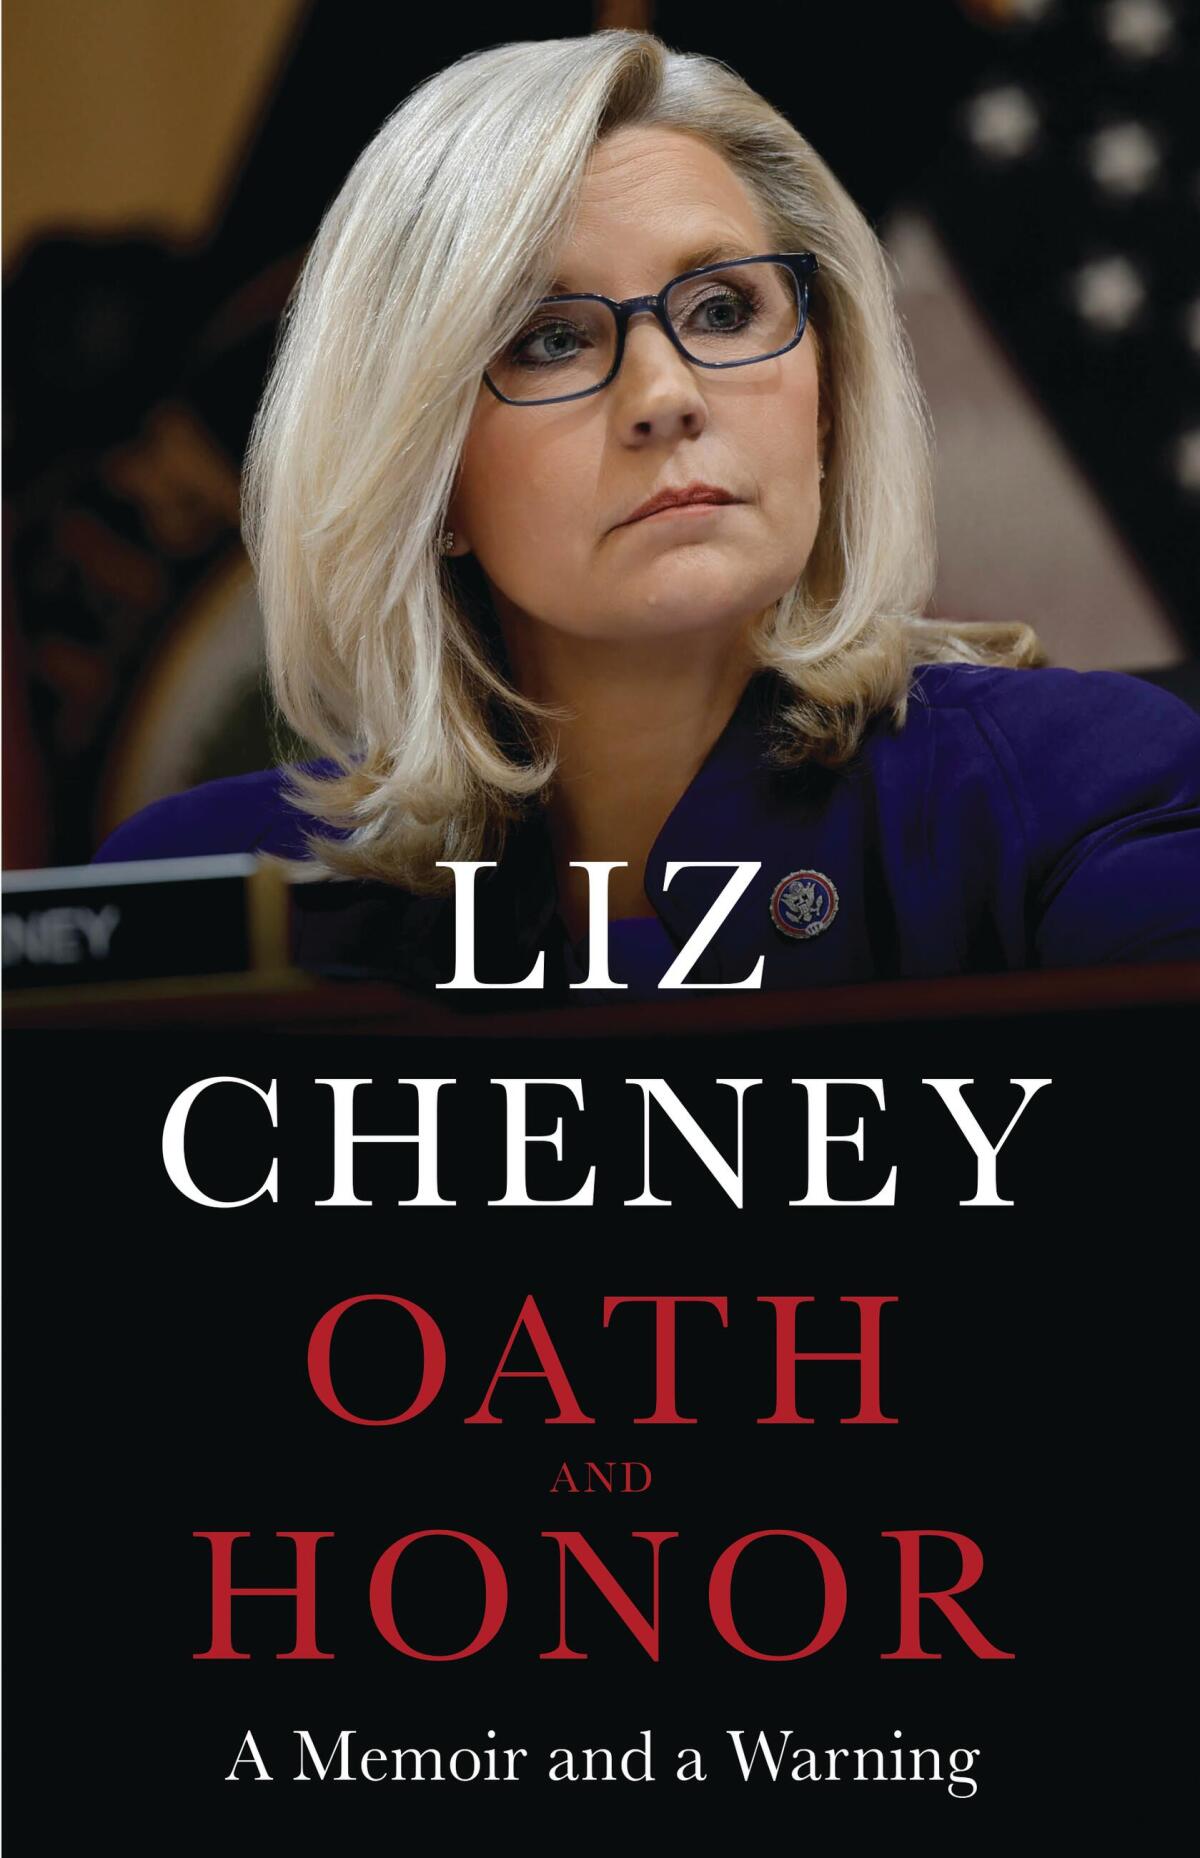 "Oath and Honor," by Liz Cheney